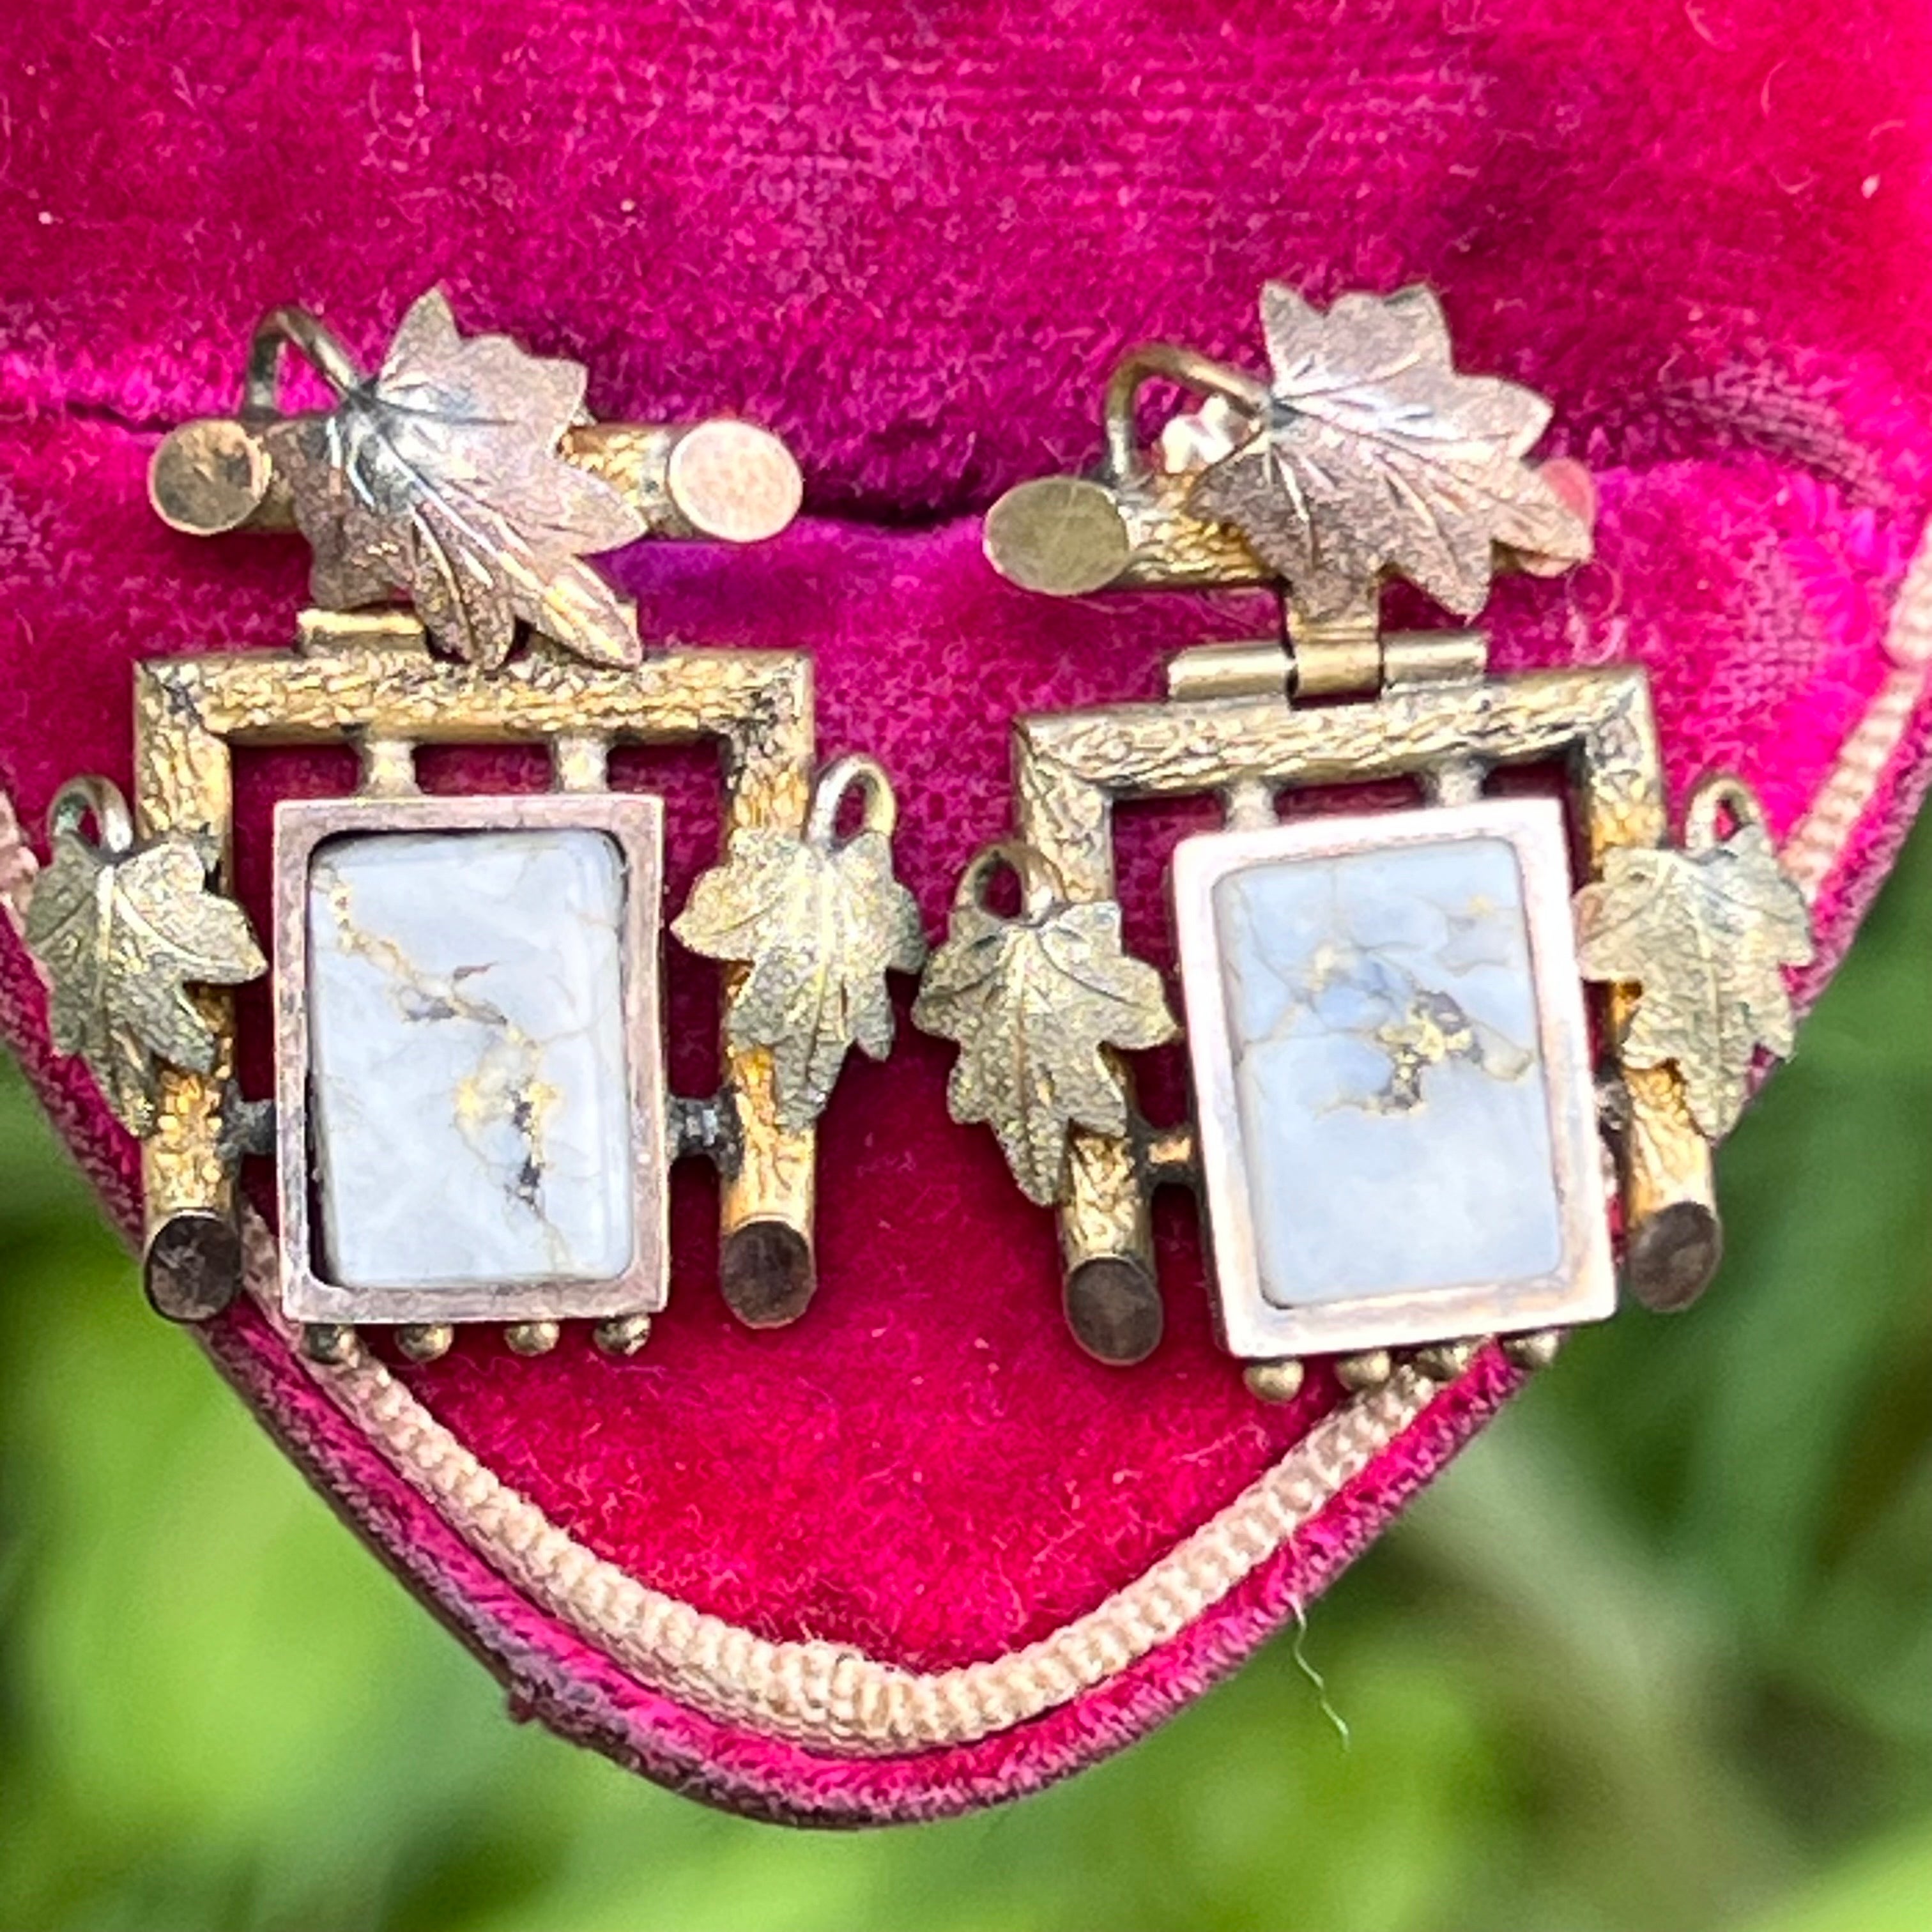 Highly collectible antique Victorian dangle / drop earrings featuring a square gold quartz stone set on an open back dual tone ( rose gold and yellow gold ) gold setting . Earrings are for pierced ears .
Unsigned /unmarked

Dates late 19th to early